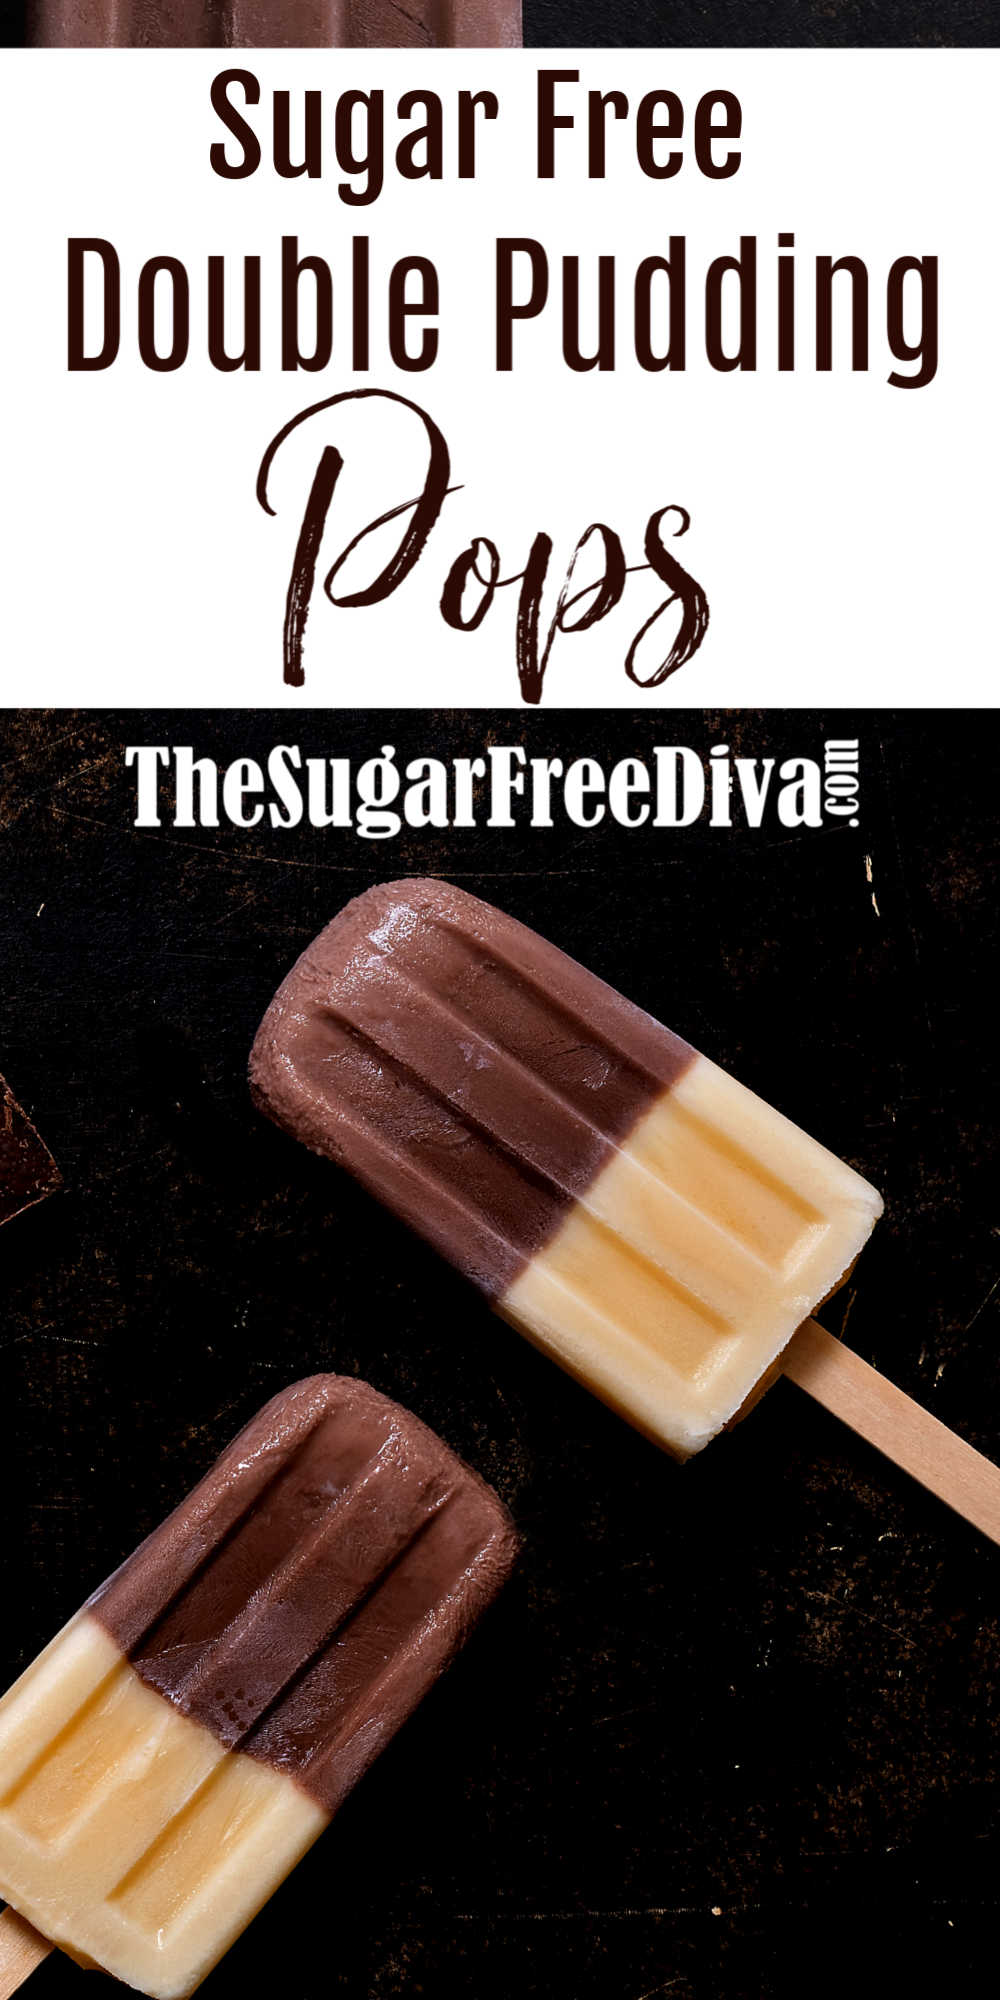 Sugar Free Double Pudding Pops